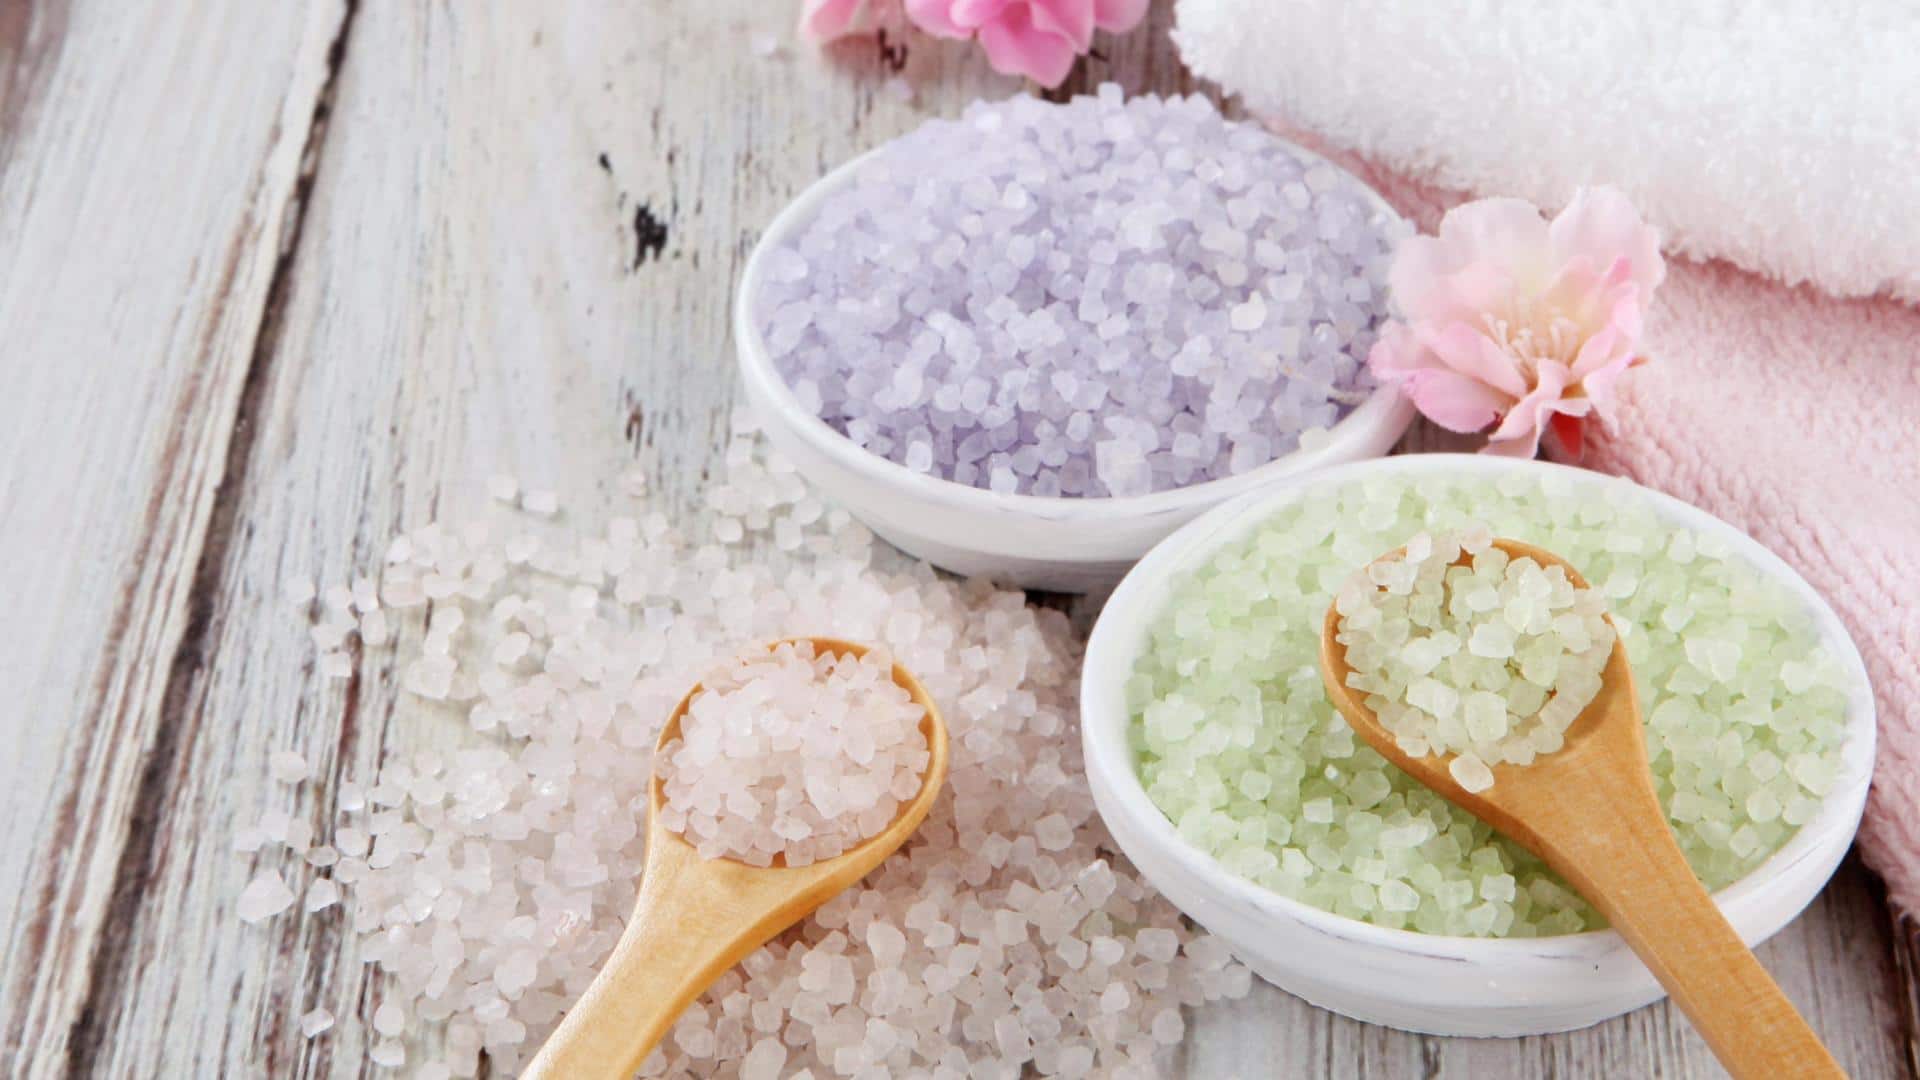 It's easy to make bath salts at home: Here's how